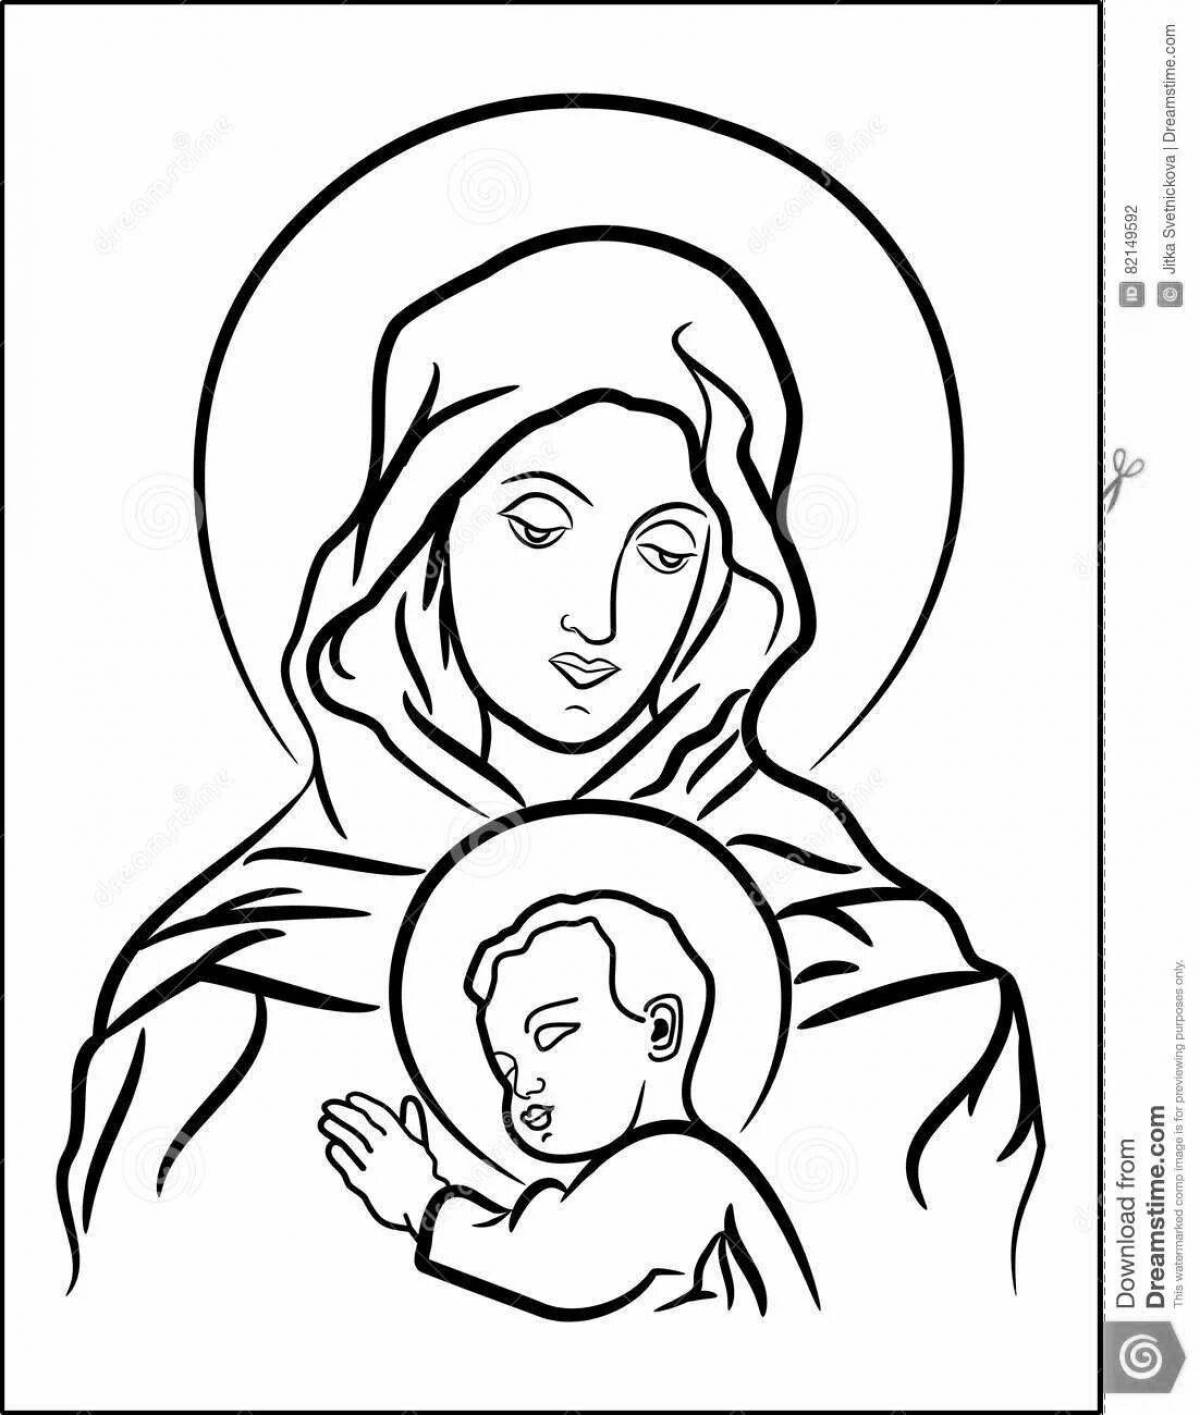 Divine coloring of the virgin mary and child